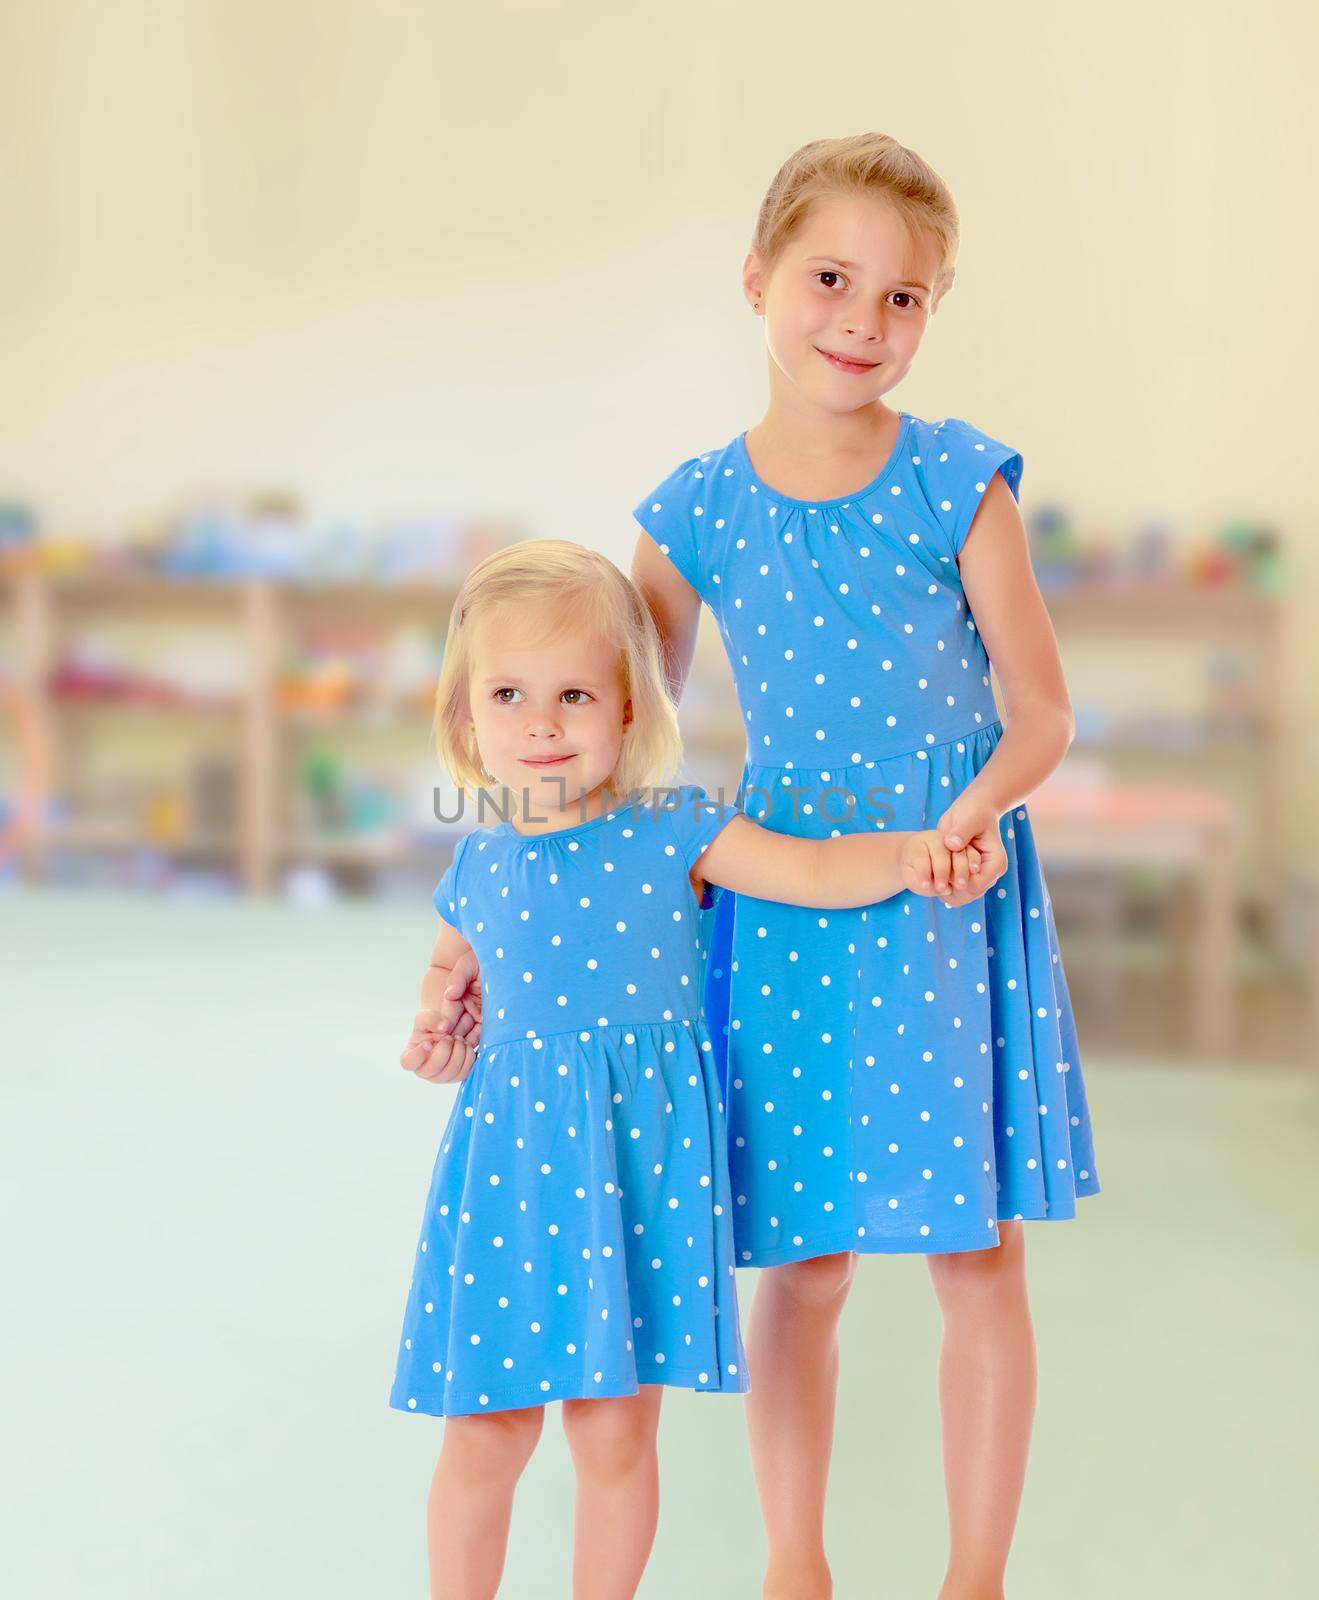 Against the background of a child's room .Two charming little girls, sisters , in identical blue dresses with polka dots , cuddling.